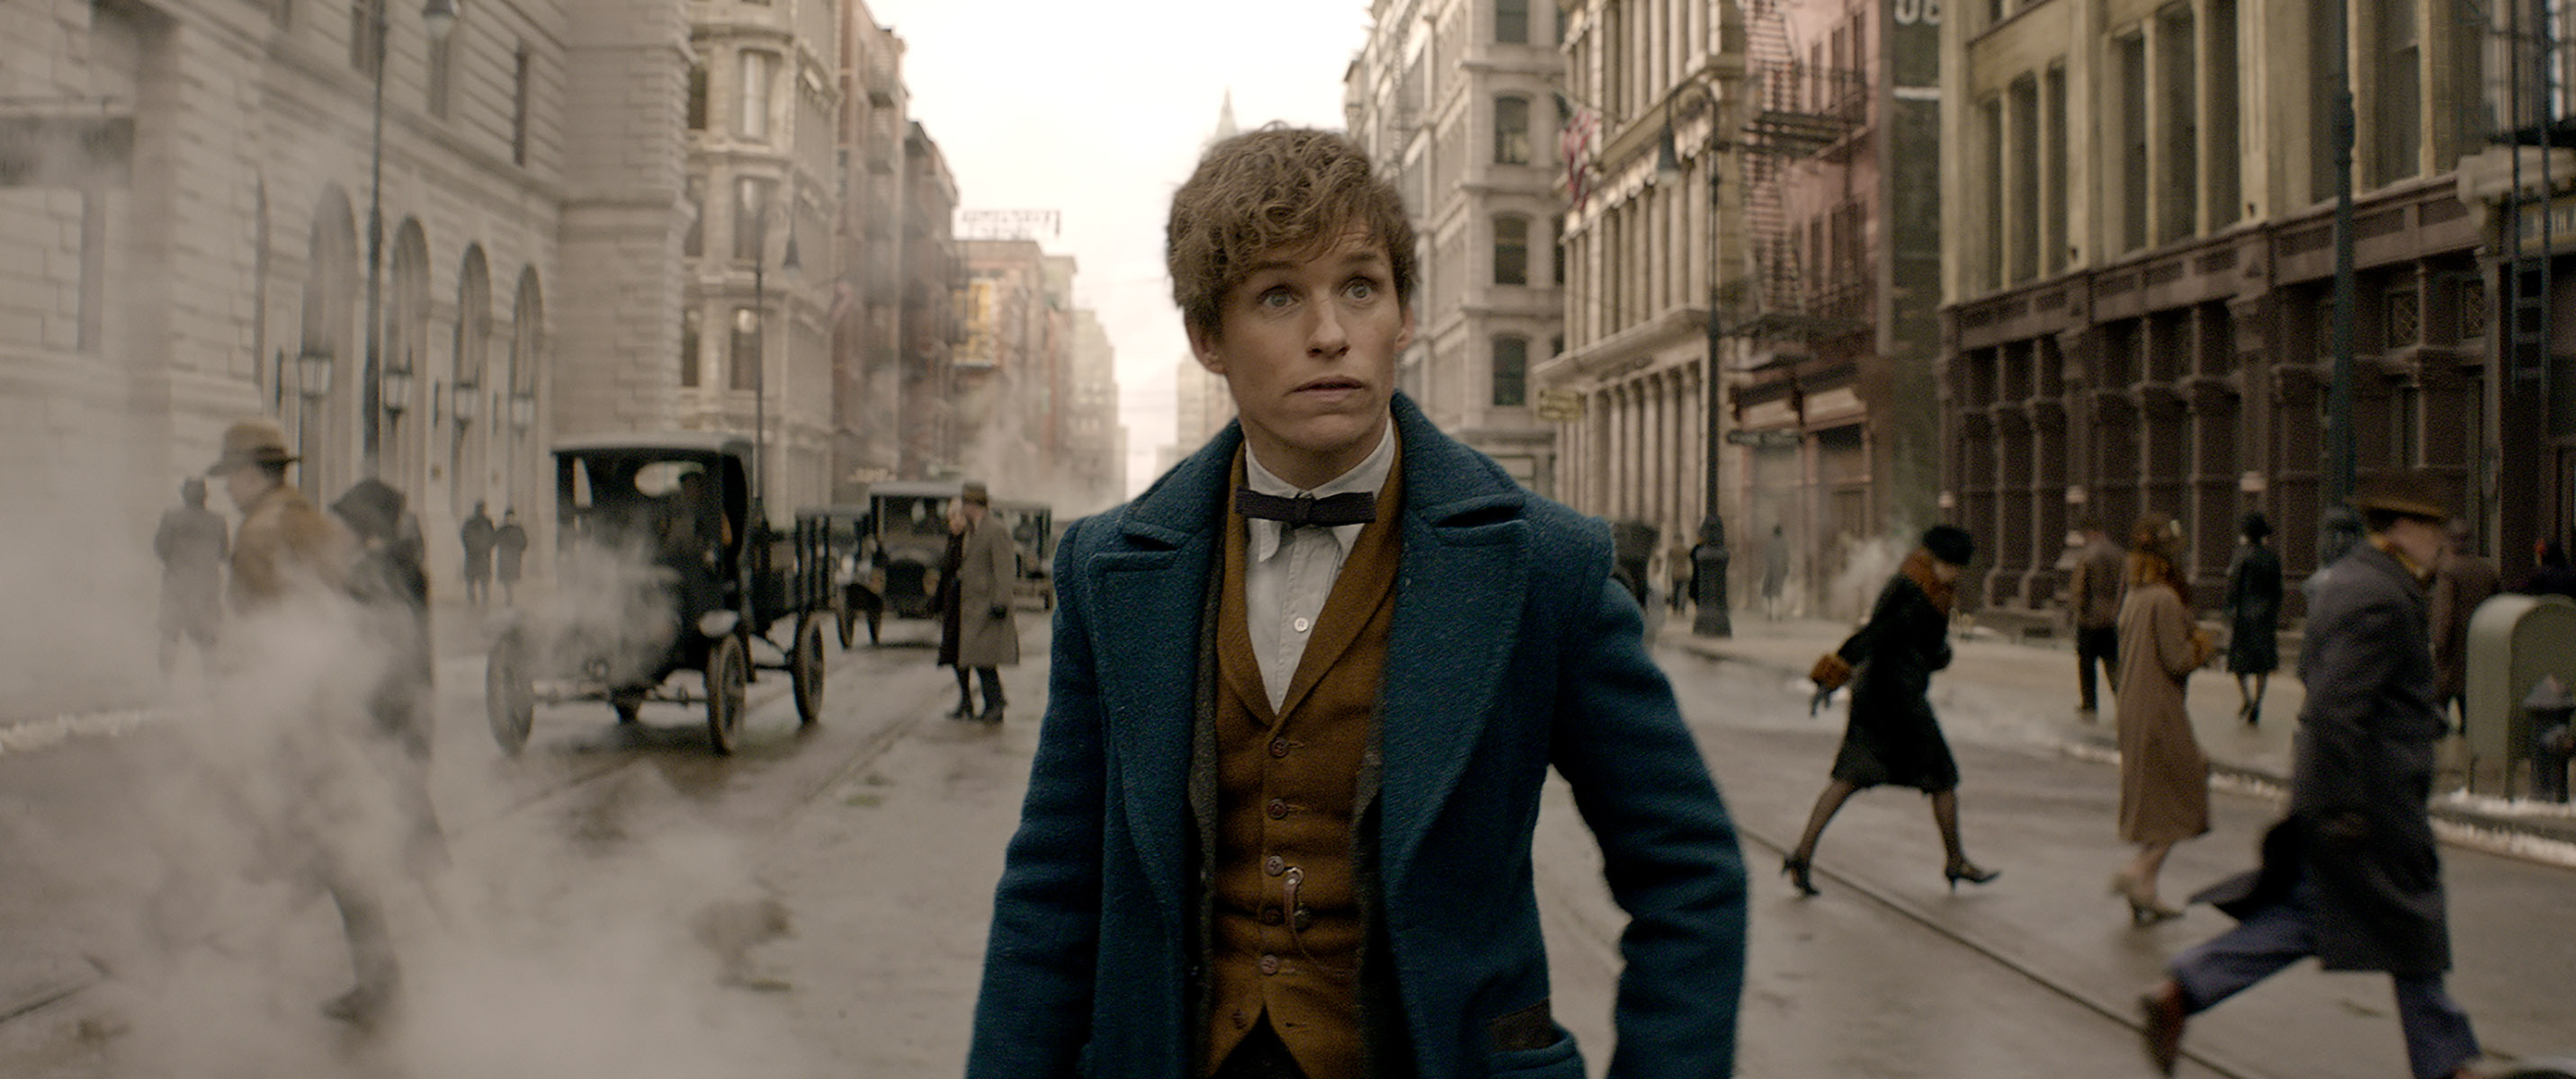 Fantastic Beasts And Where To Find Them Film Full HD Online 2016